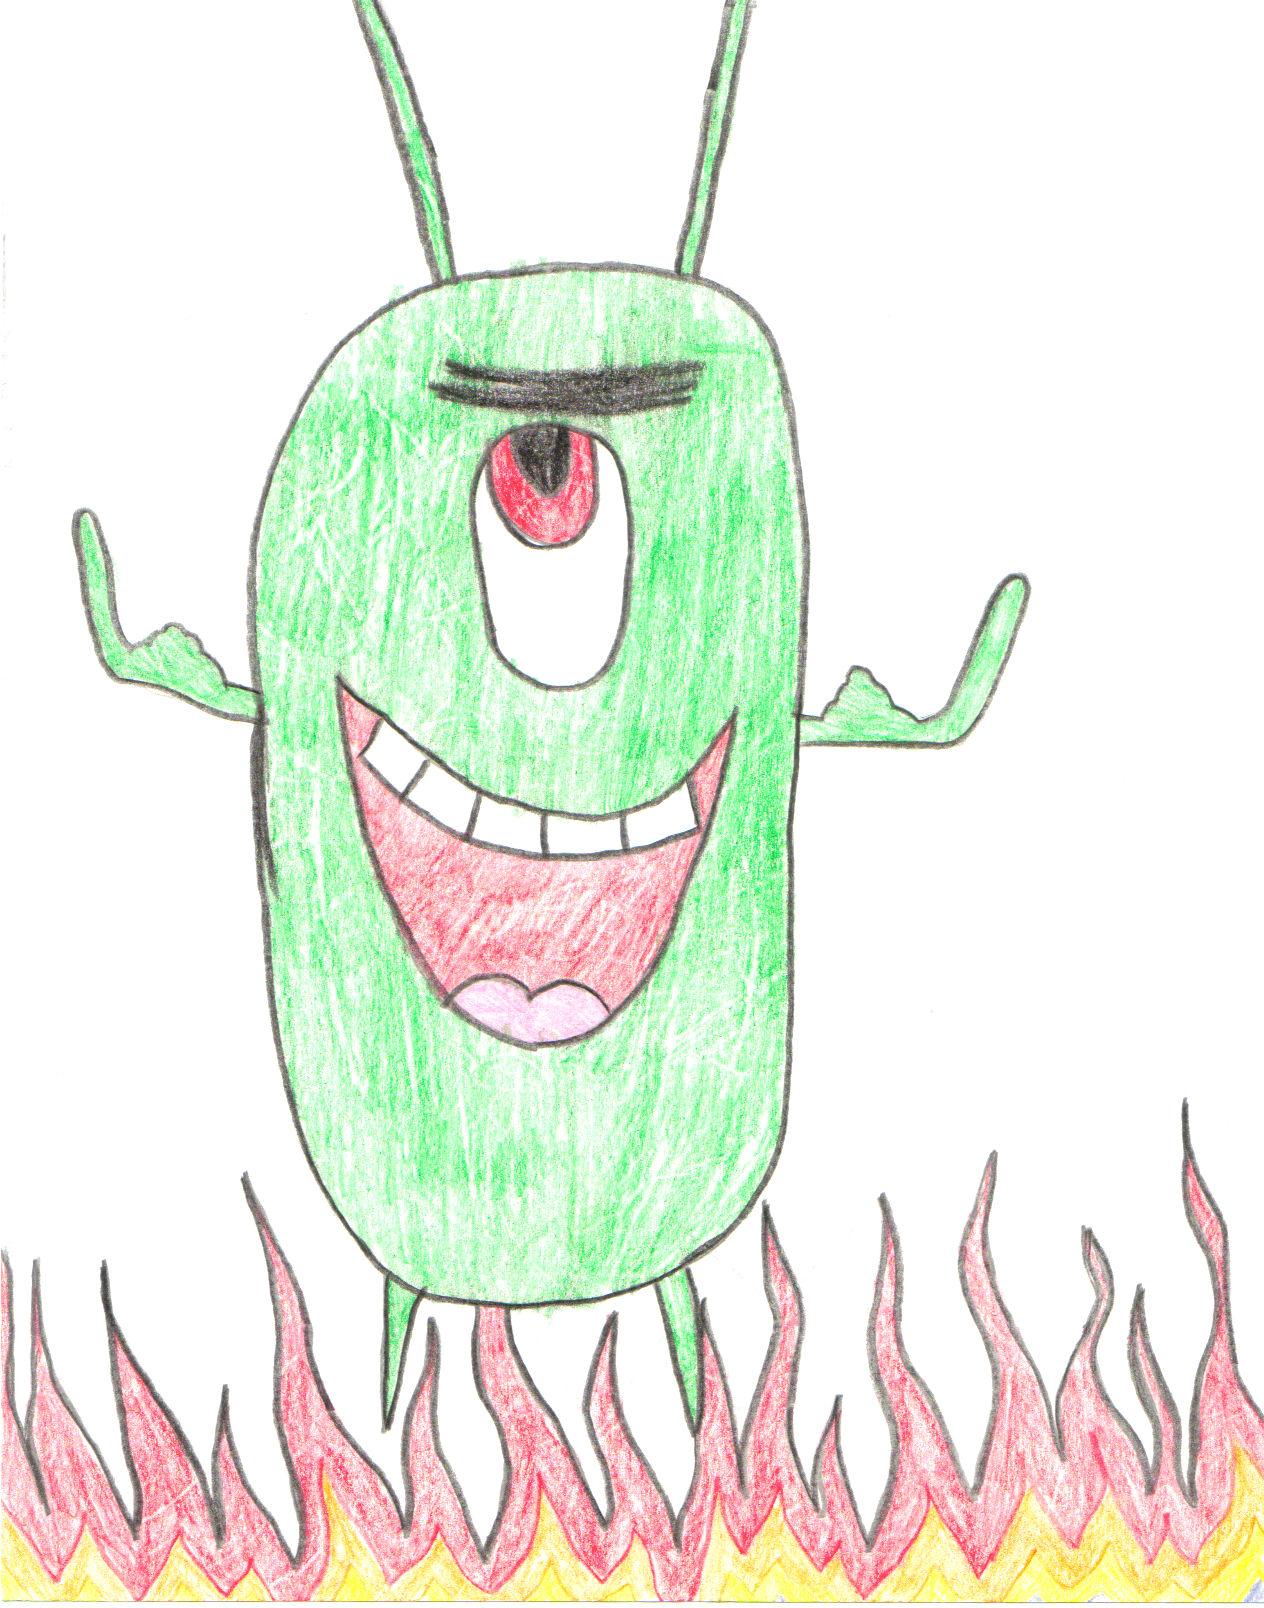 Plankton by frog_lover300